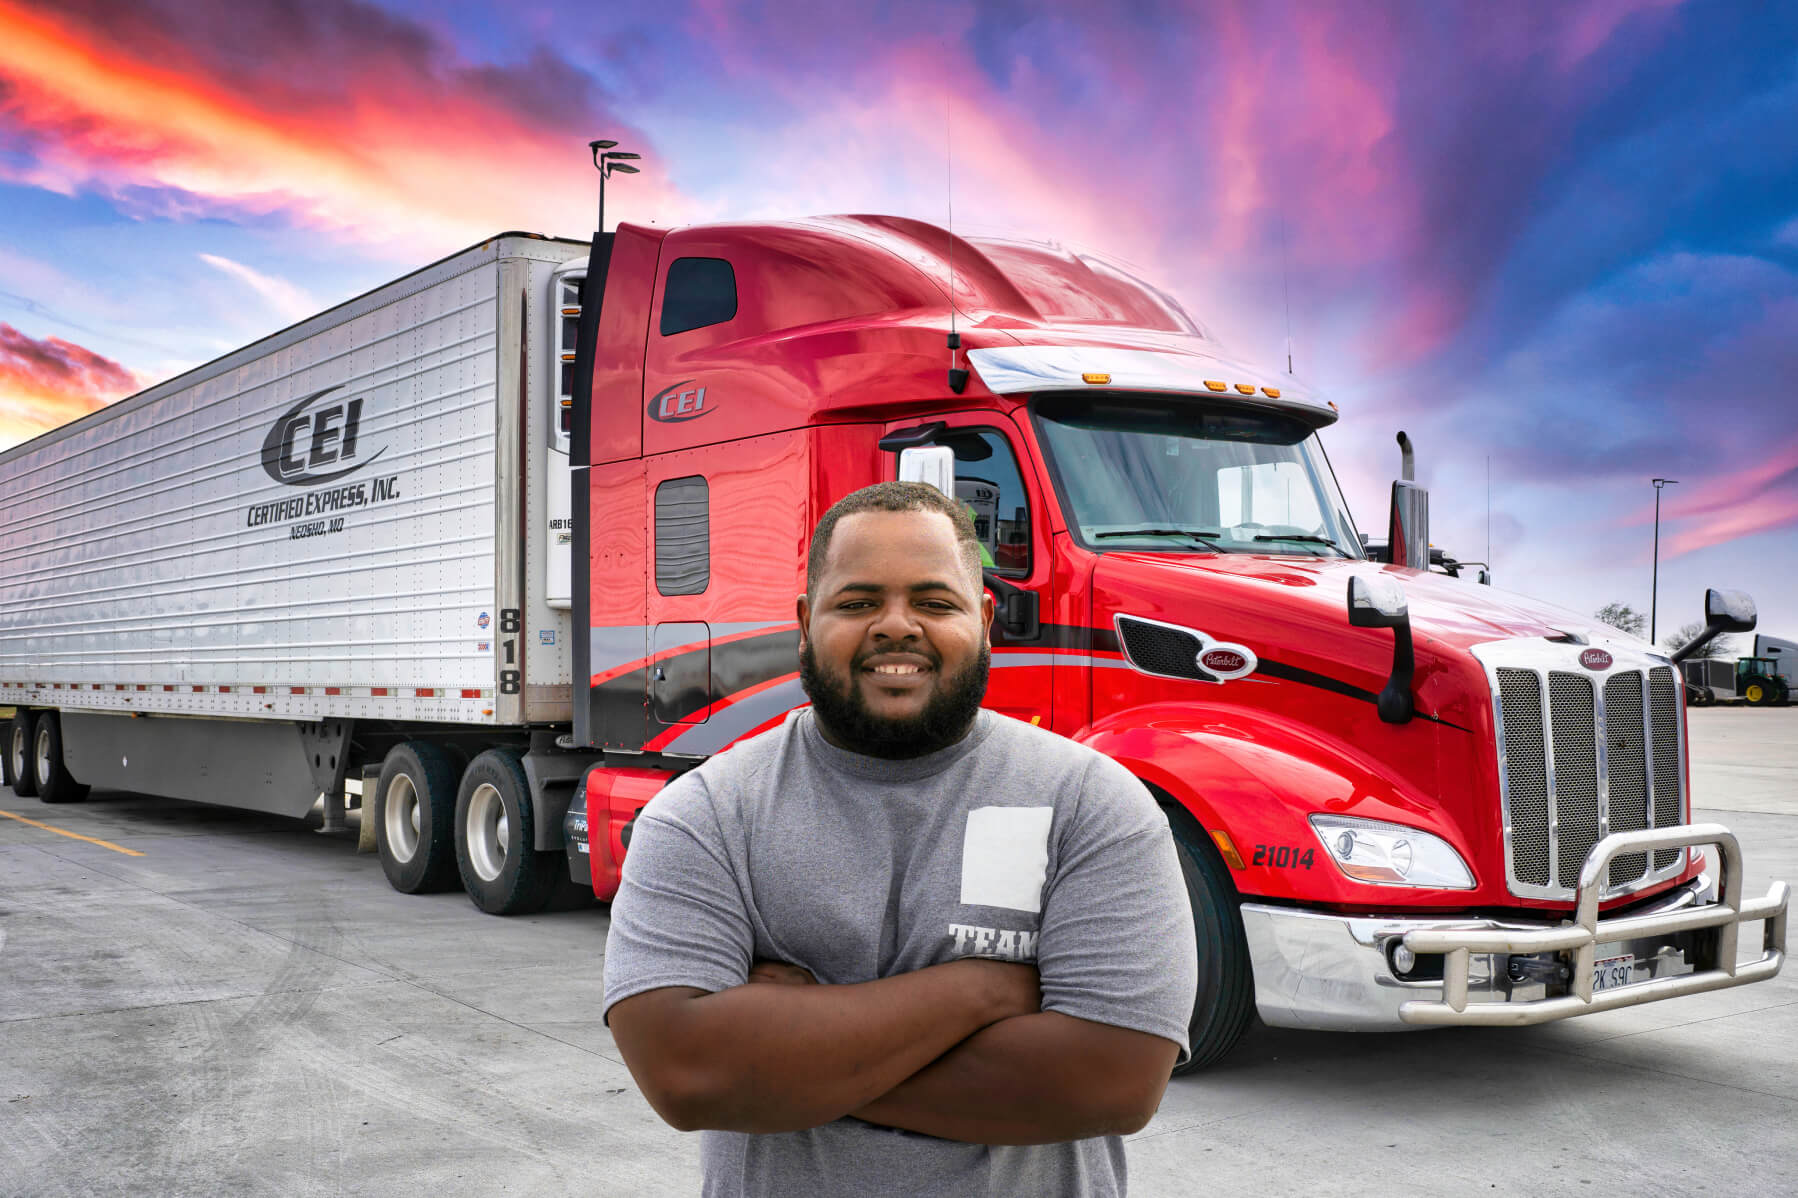 A CEI truck driver stands, arms crossed in front of a red semi truck and trailer with a colorful sunset behind.